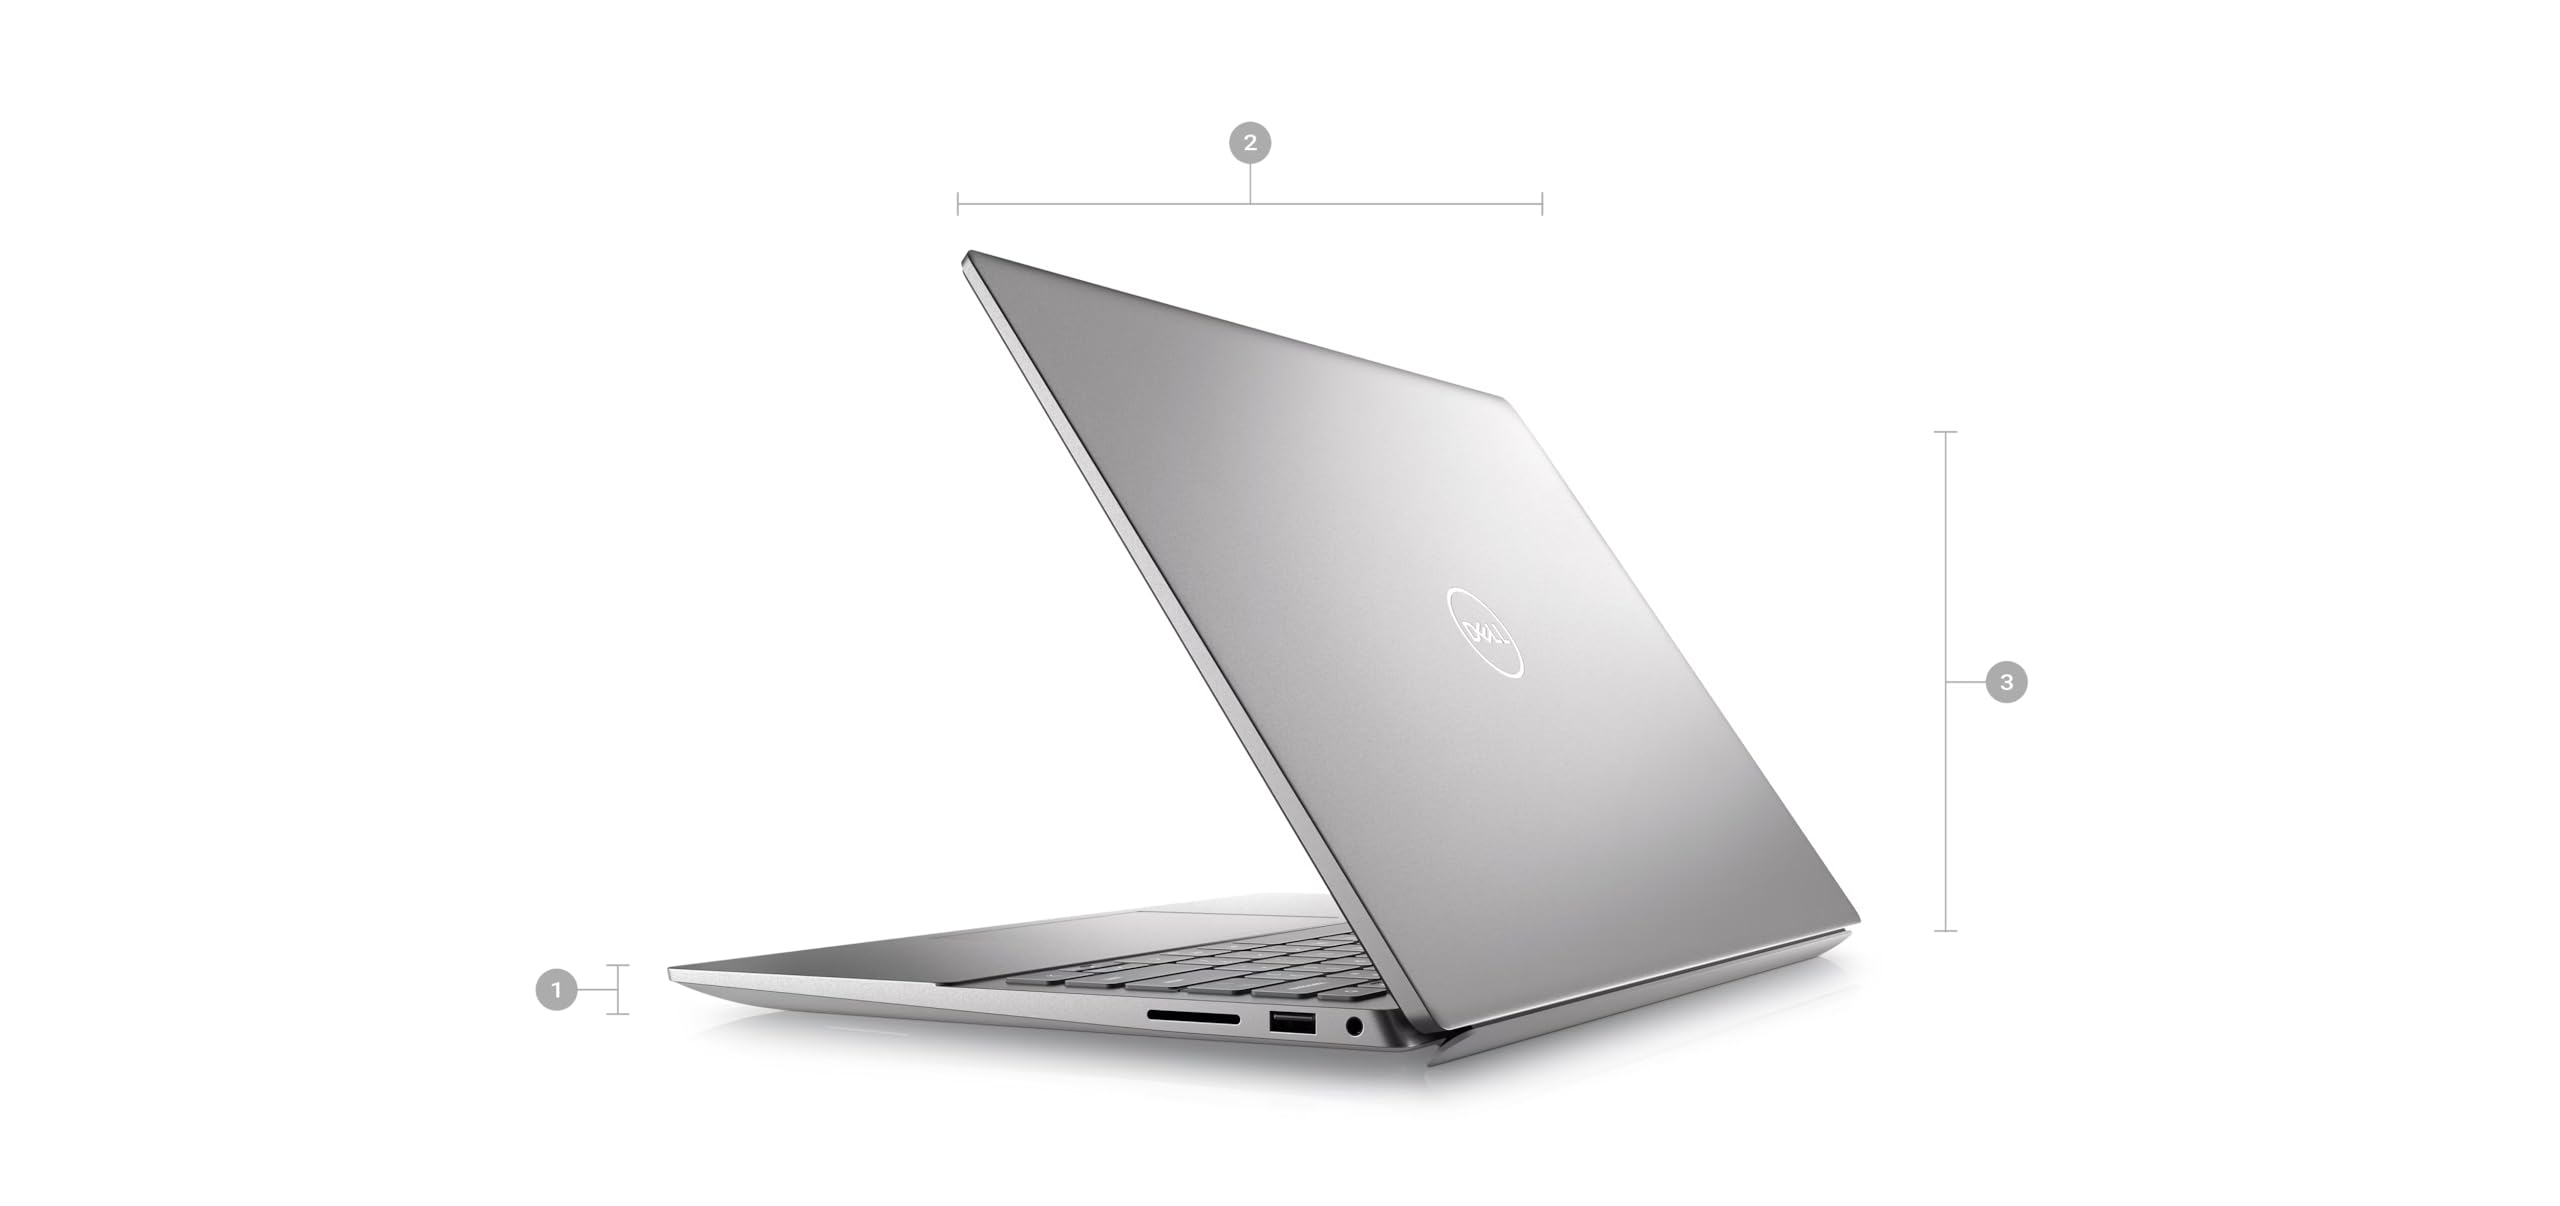 Dell Inspiron 14 5425 Laptop (2022) | 14" FHD+ Touch | Core Ryzen 5 - 512GB SSD - 16GB RAM | 6 Cores @ 4.3 GHz Win 11 Home (Renewed)